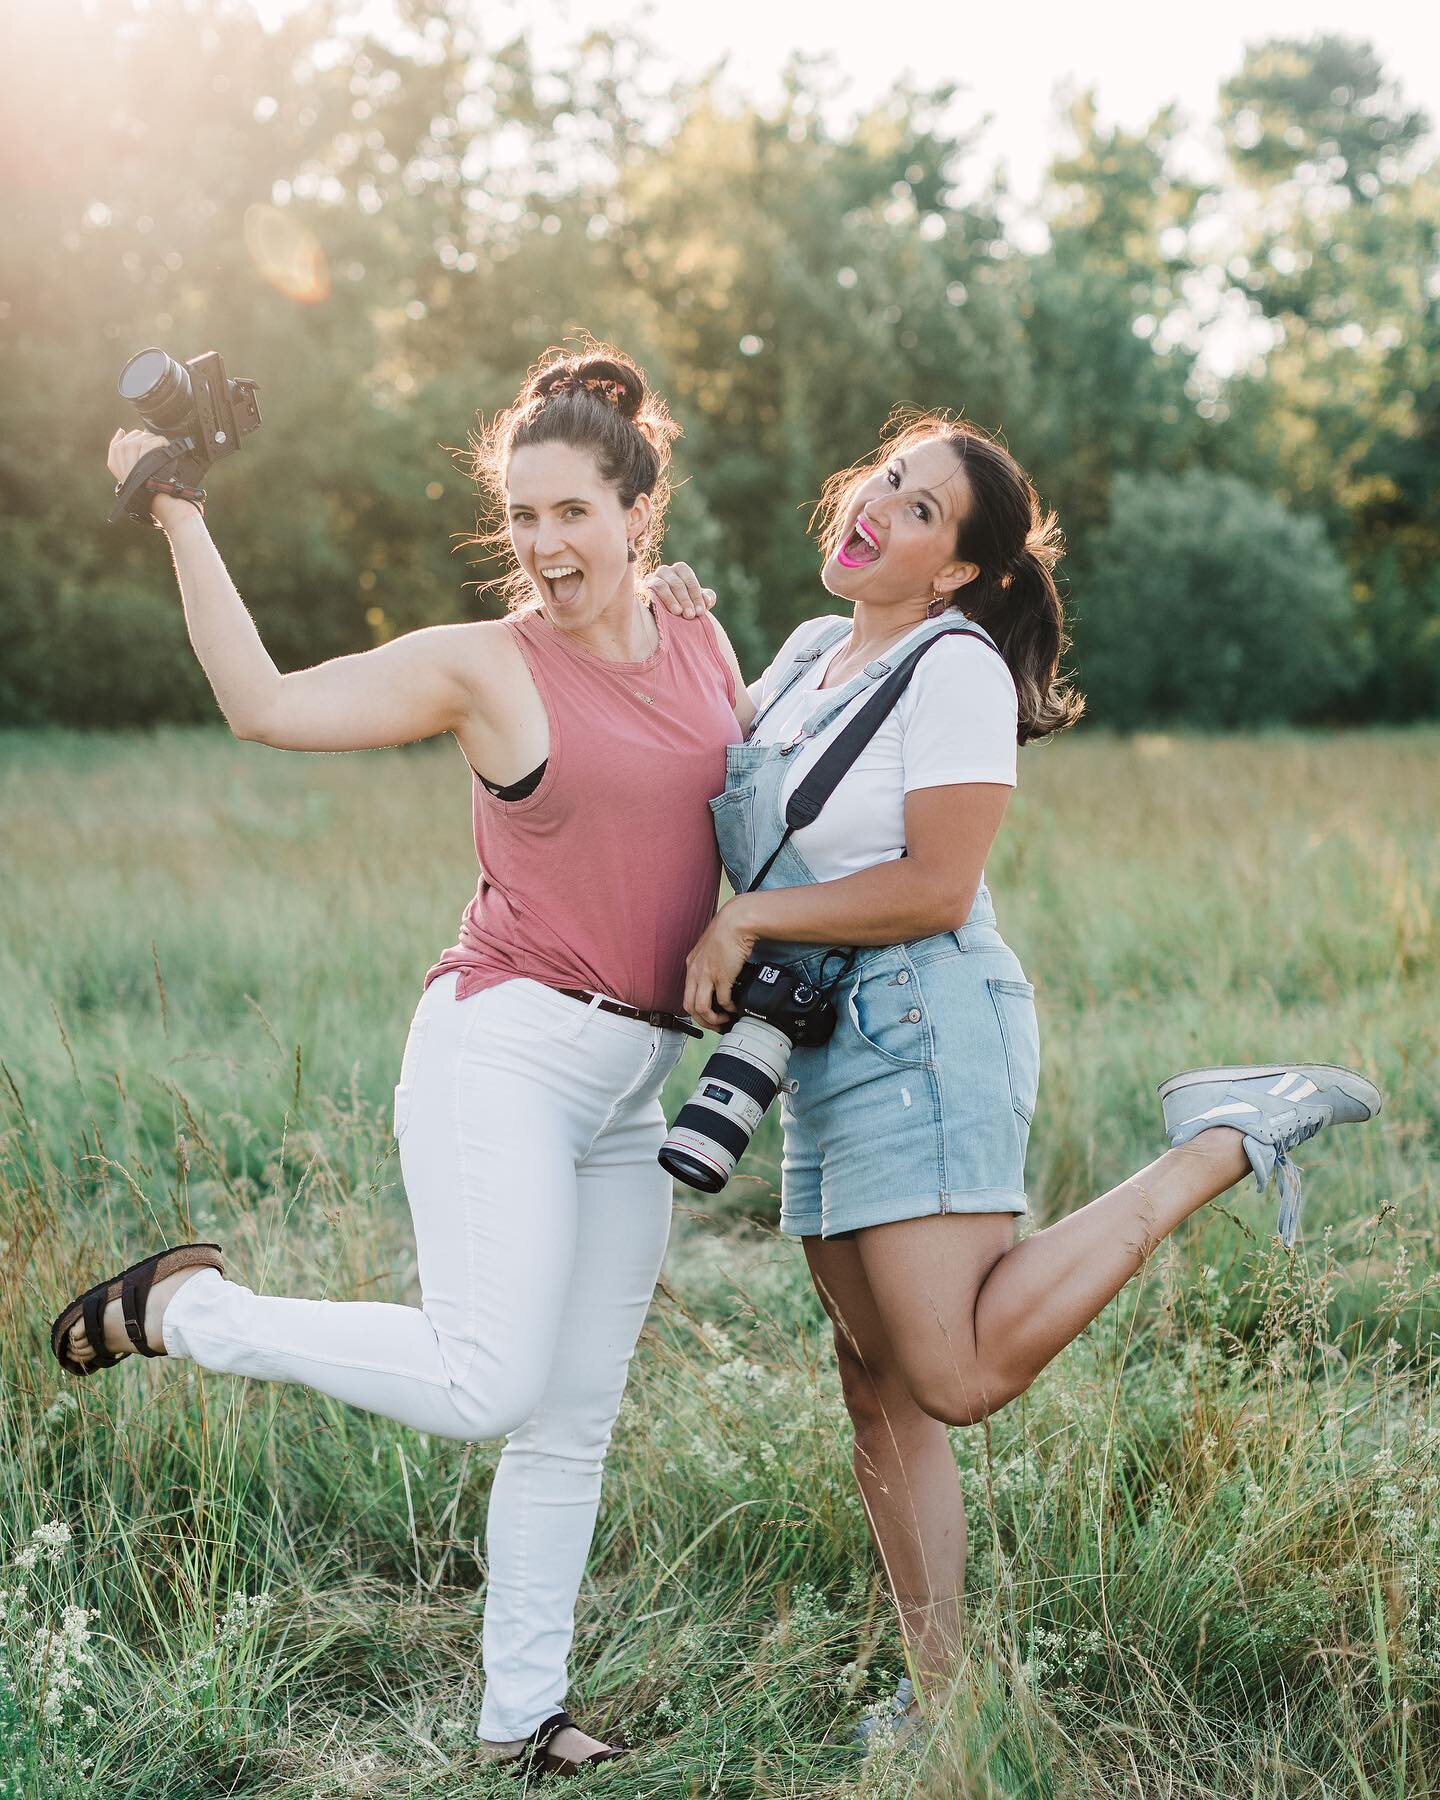 Round One of our Field Mini Sessions were a HECK YEA success! So nice to reconnect with humans again after what feels like a hibernation the past year. Some were my past wedding couples, friends and even former students from when I used to teach! It 